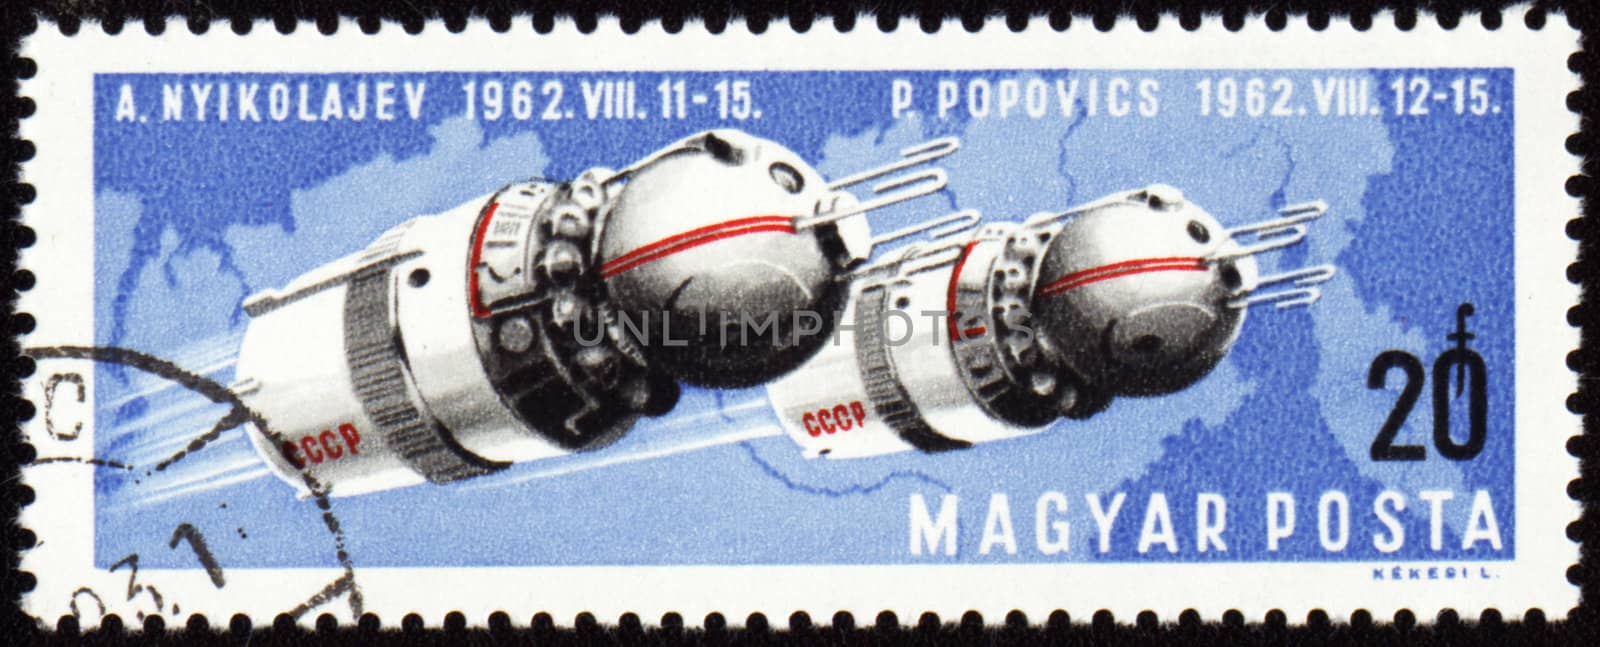 HUNGARY - CIRCA 1962: A stamp printed in Hungary shows soviet spaceships Vostok-3 and Vostok-4 with cosmonauts 

Nikolaev and Popovich in space, circa 1962